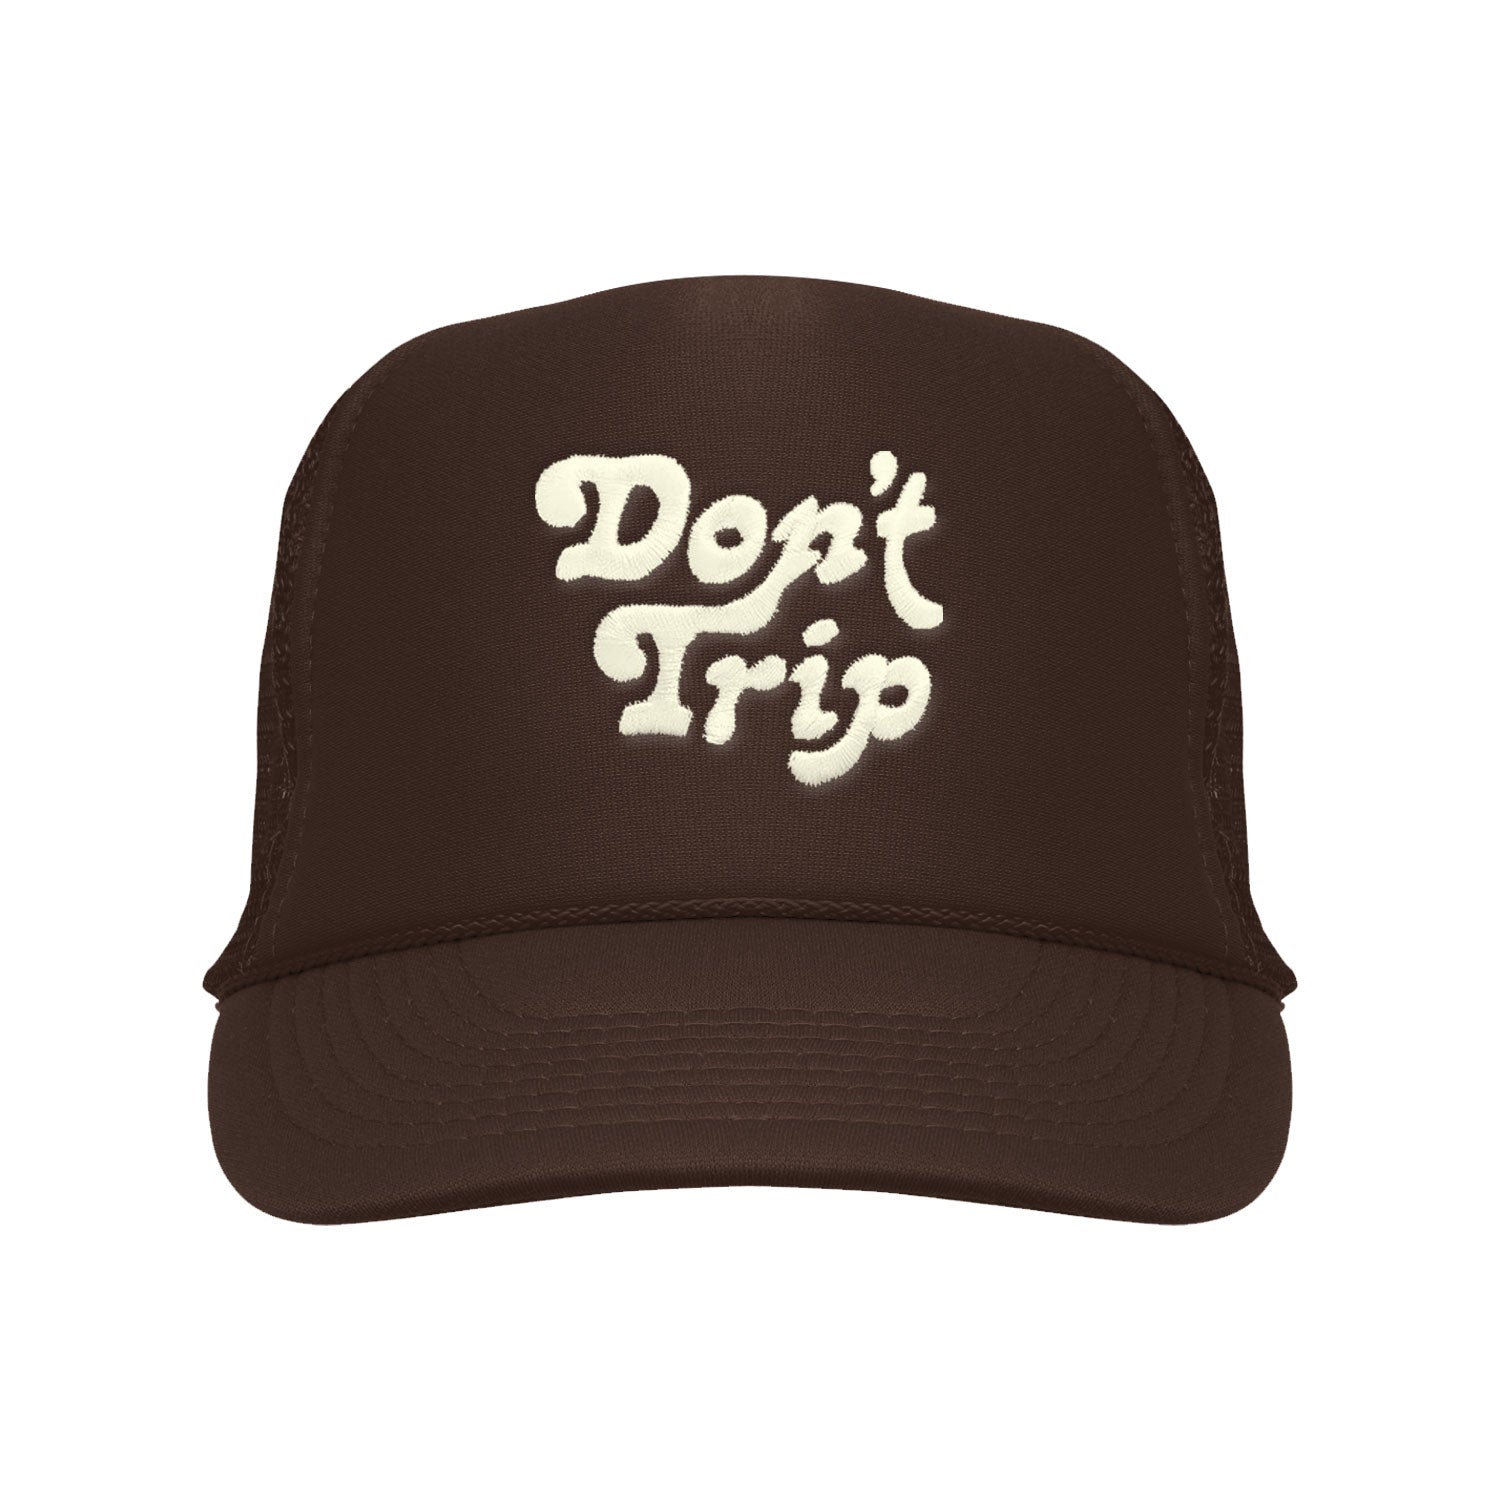 Don't Trip brown trucker hat with white embroidered Don't Trip logo on white background - Free & Easy